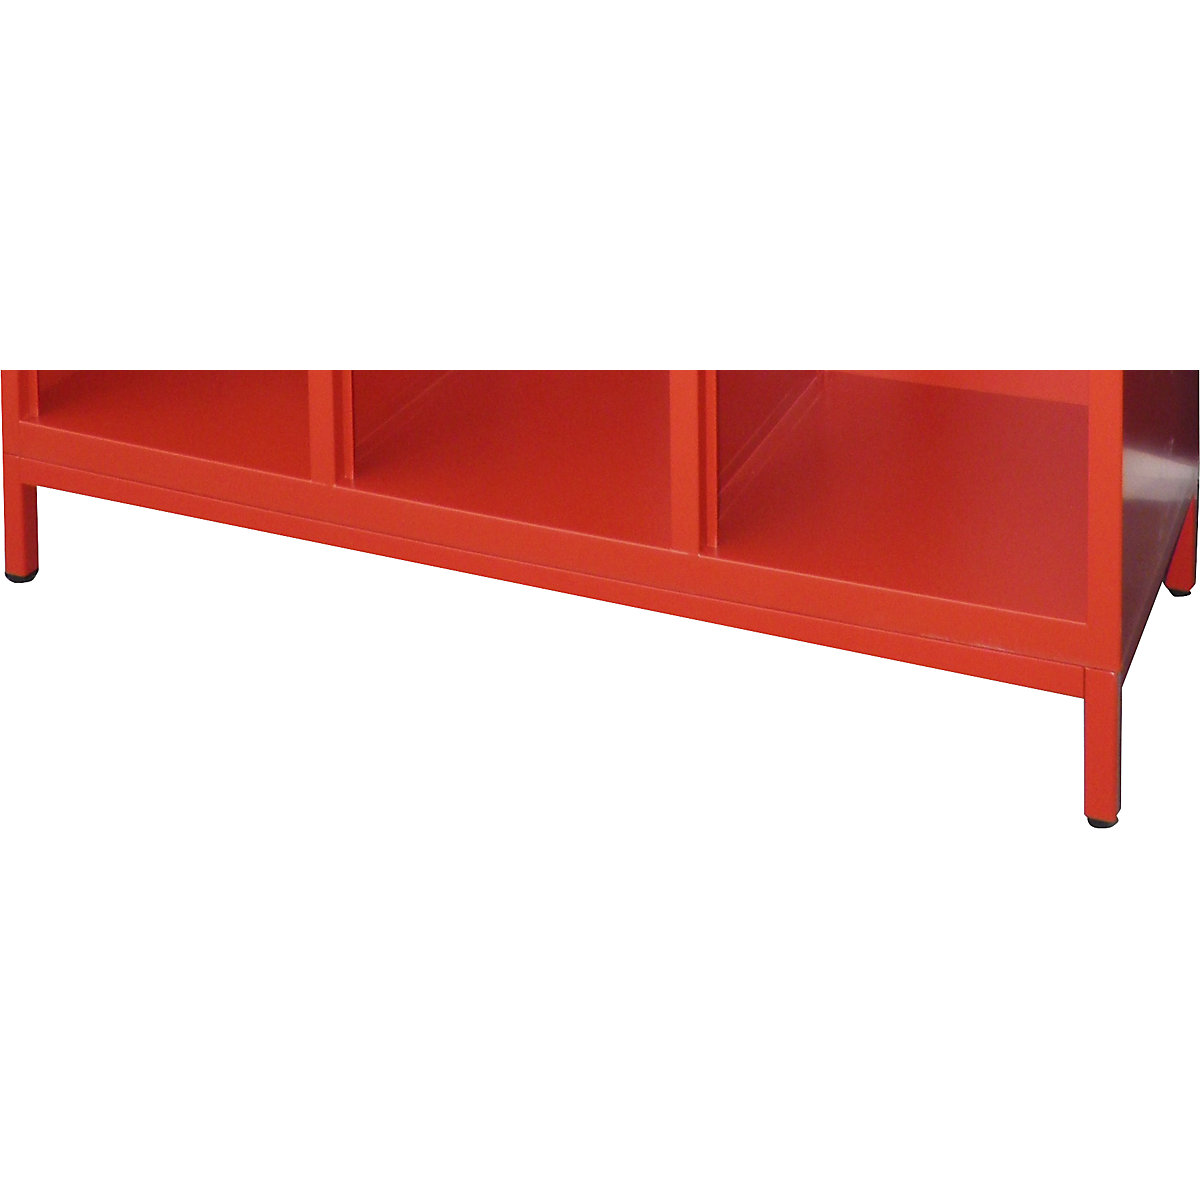 Base frame for fire brigade cupboard - Pavoy